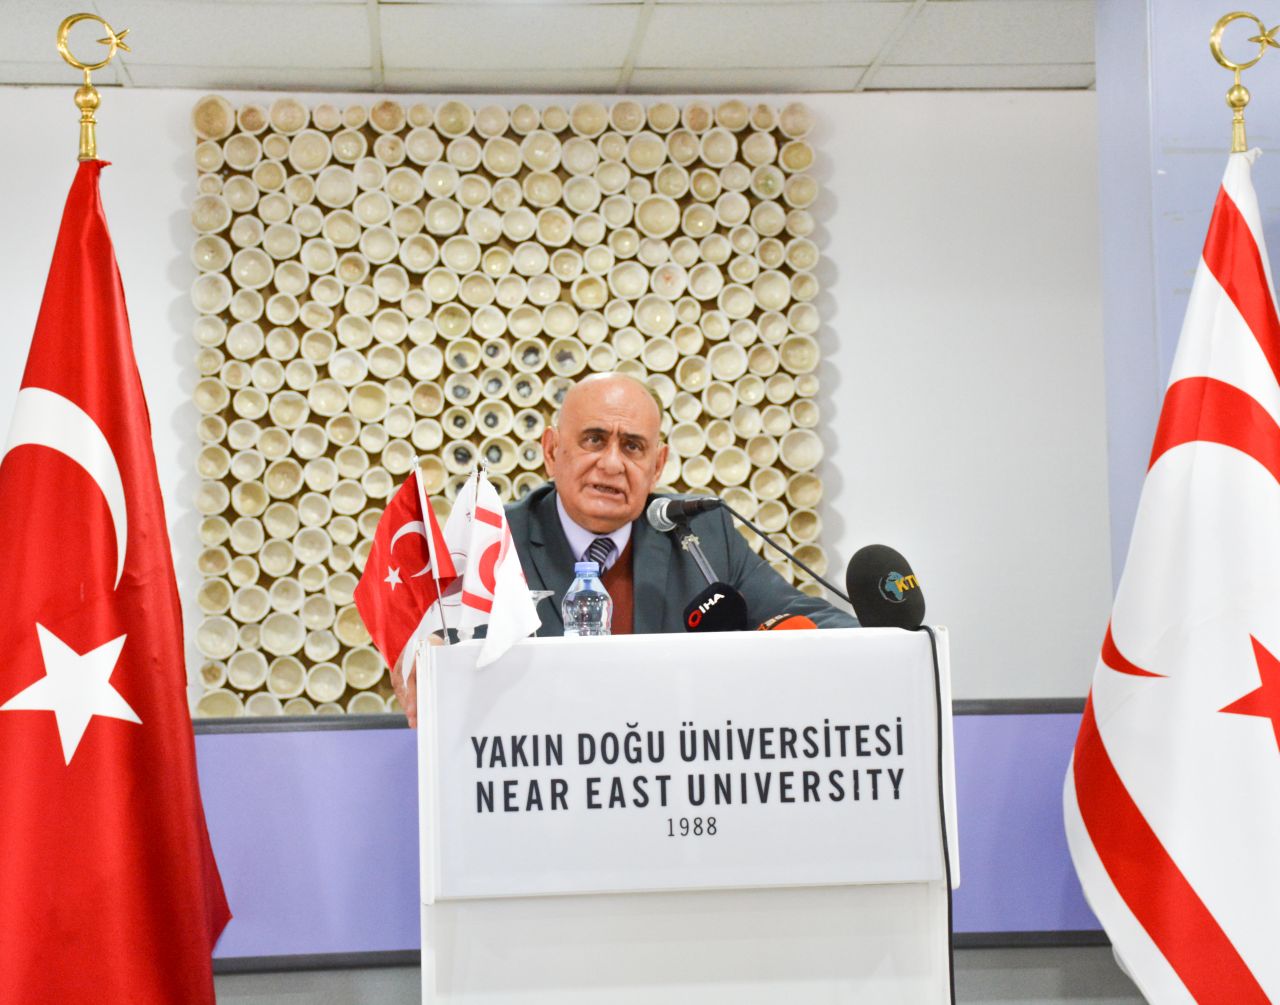 Featuring 165 original artworks of 92 artists, the exhibition themed “Dr. Fazıl Küçük and National Struggle” was opened at Cyprus Arts Center by TRNC President Mustafa Akıncı